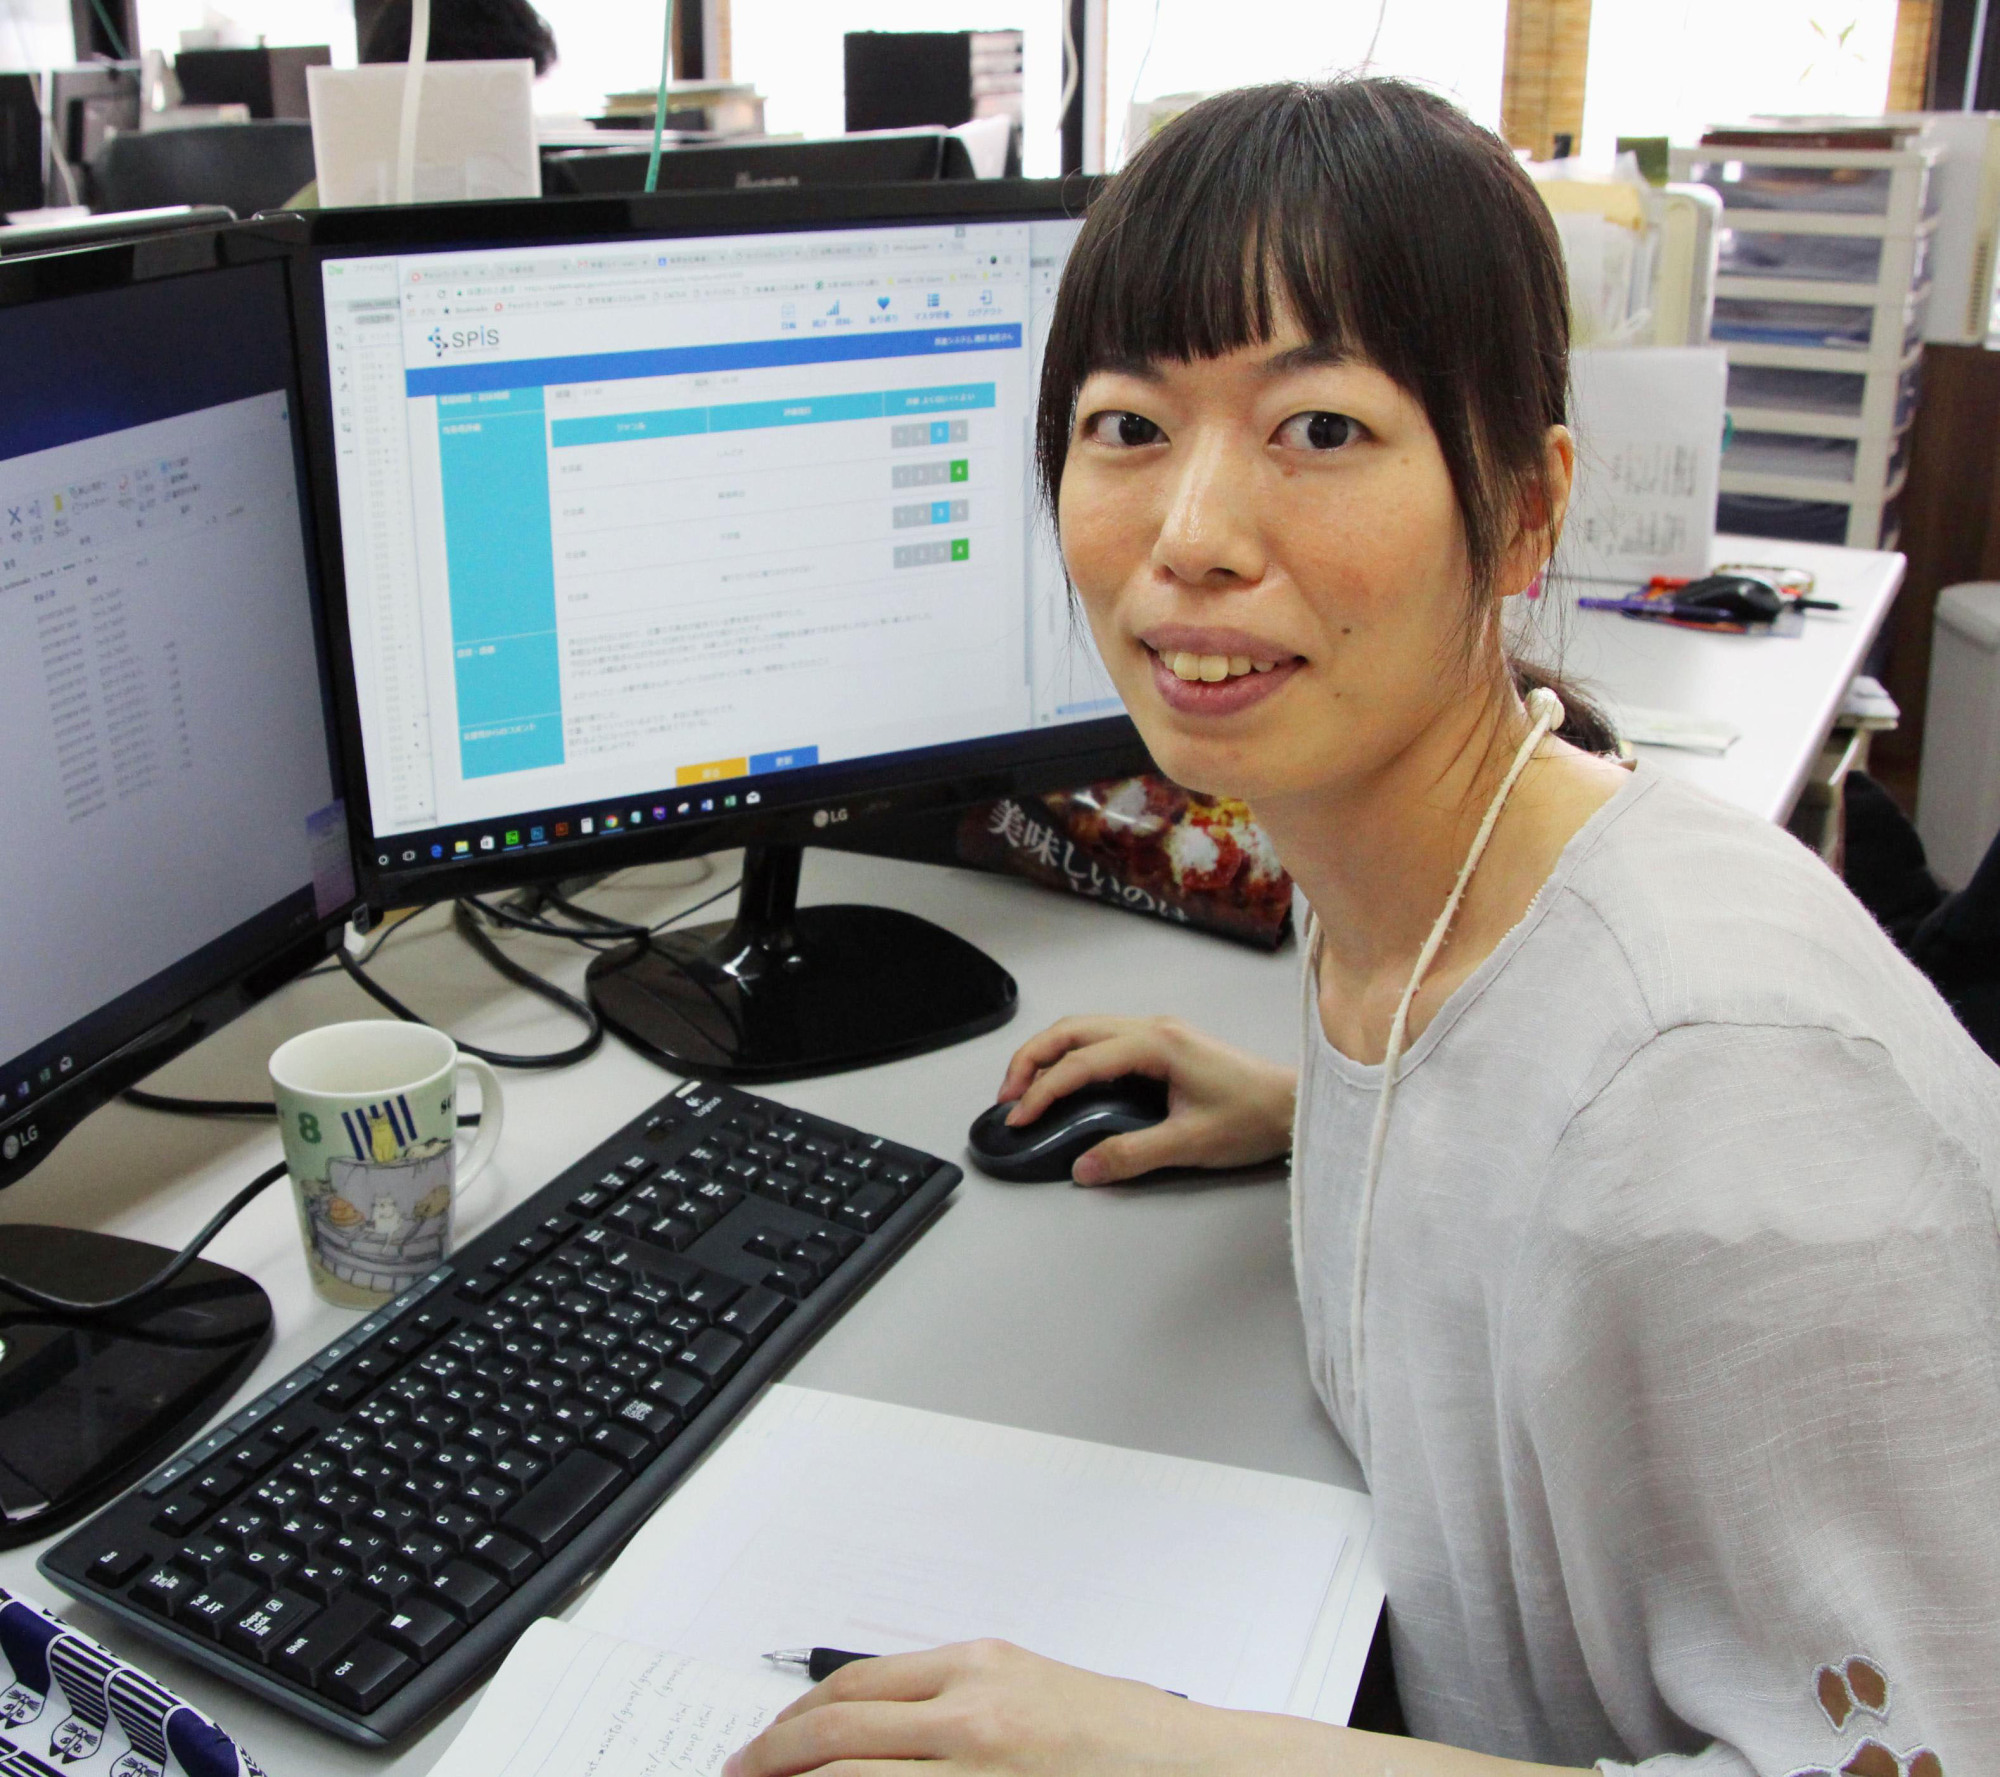 Risa Urata, who has a developmental disorder, explains a software program developed by her company, Okushin System, that monitors early symptoms of mental health issues, on Aug. 4 in Osaka. | KYODO